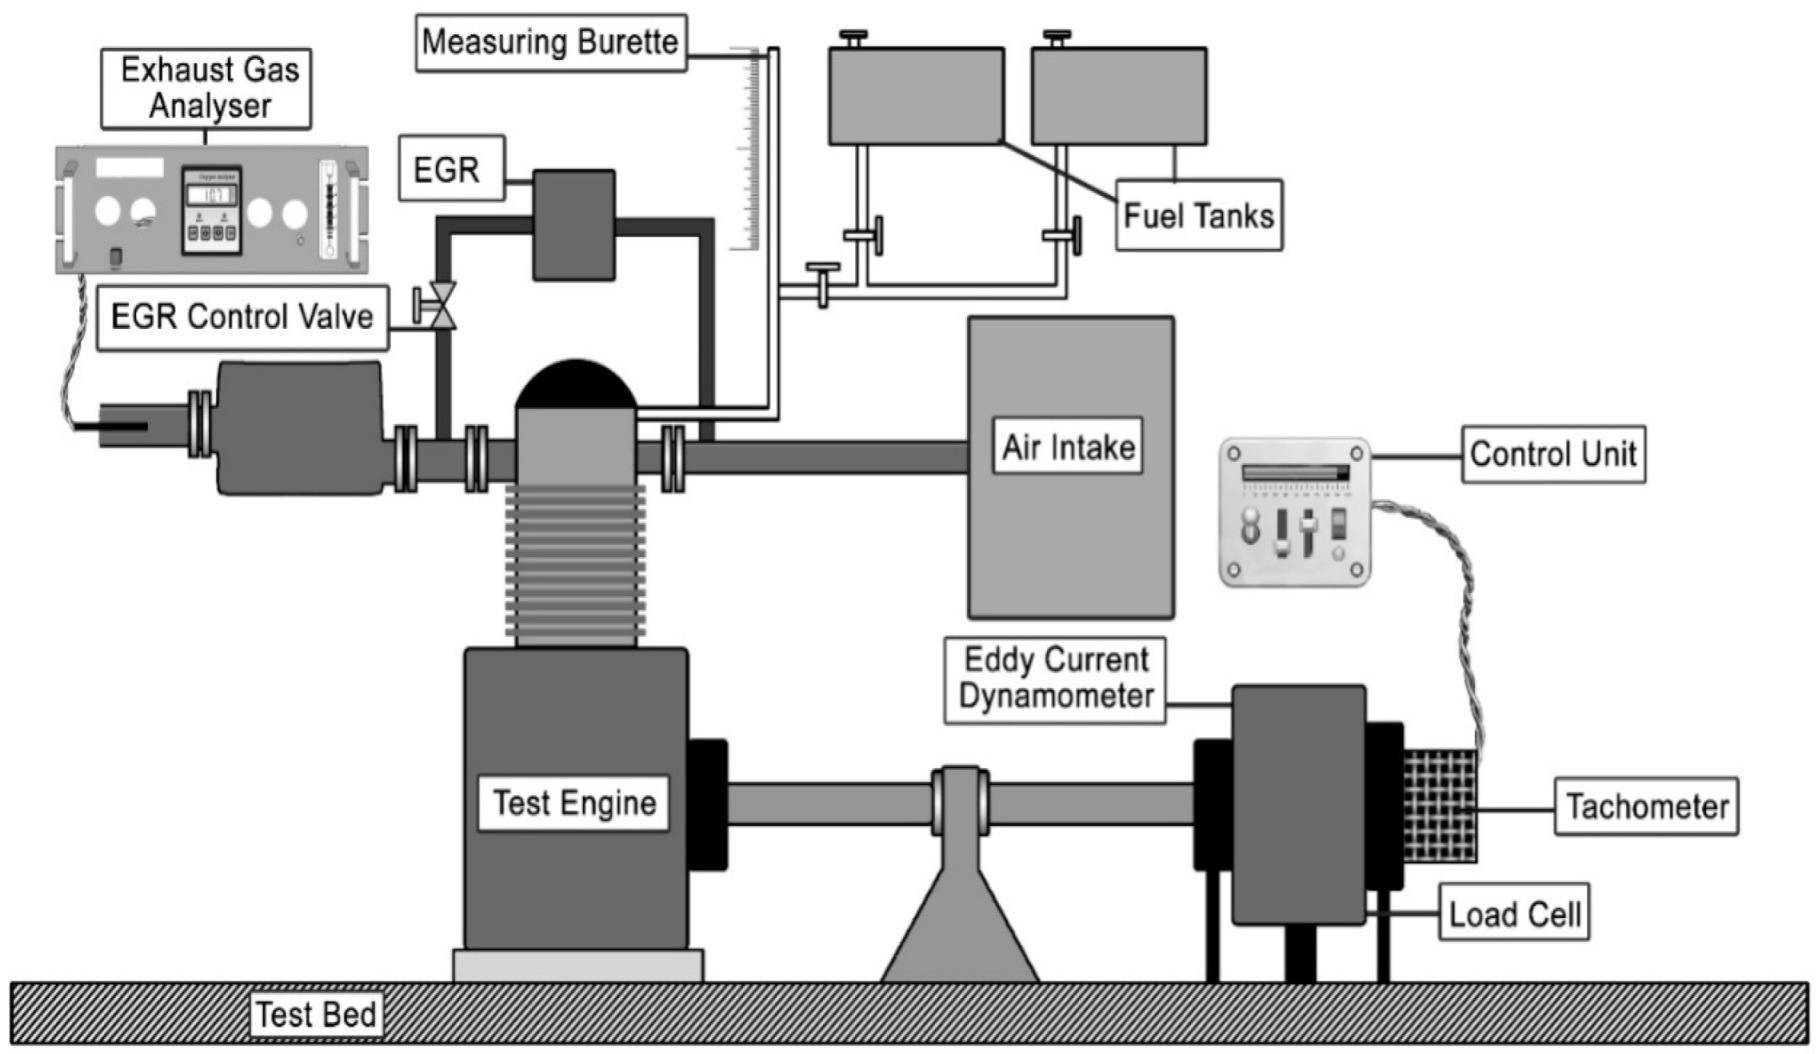 Schematic representation of test engine setup used for the experiment.